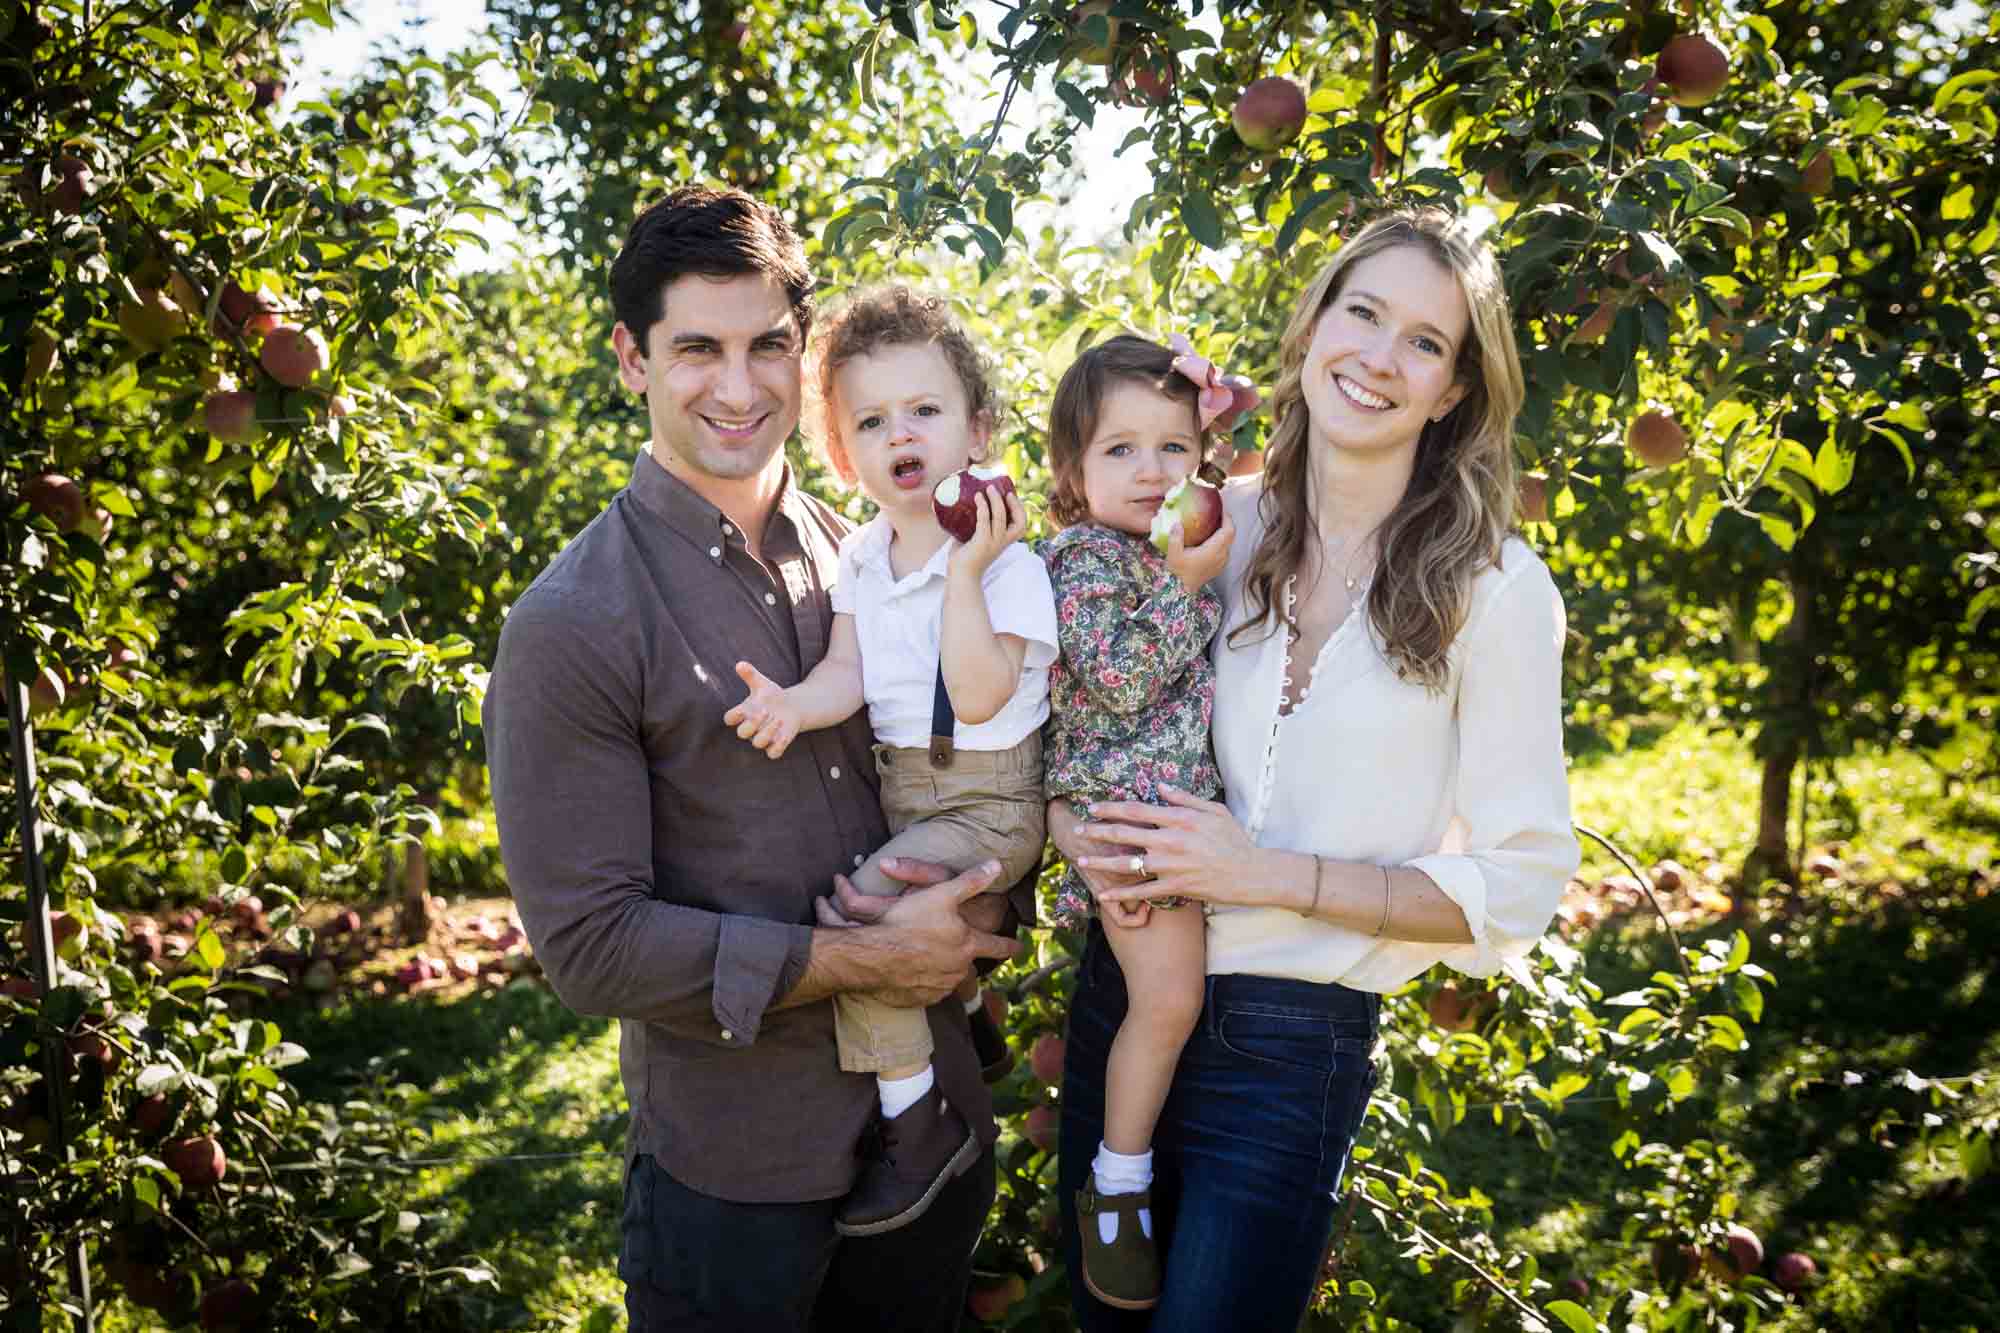 Parents holding toddlers in an orchard for an article on tips for apple picking family photos